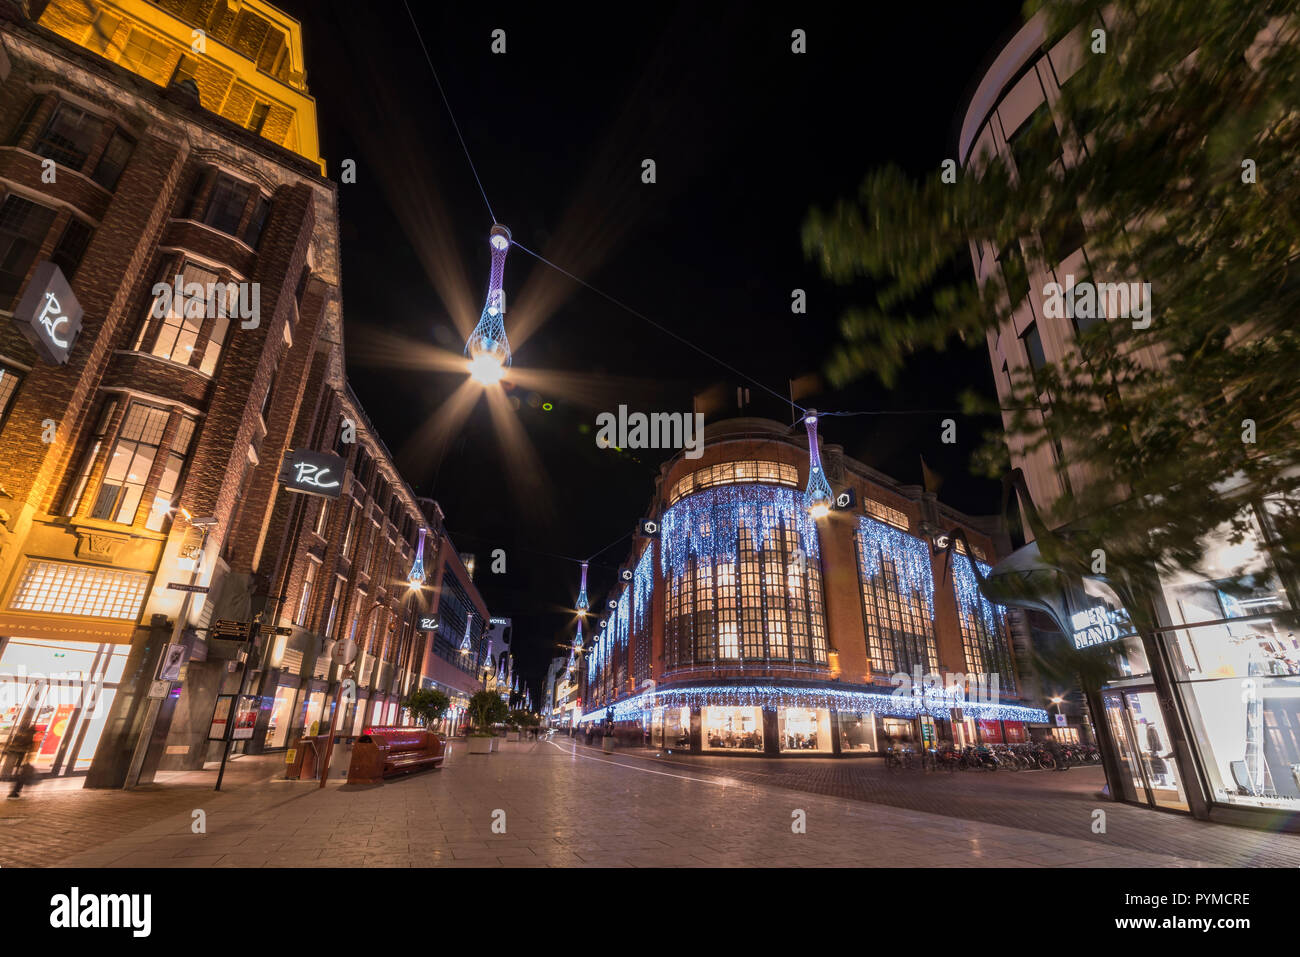 THE HAGUE, 7 January 1018 - Night view of The Hague center city abandoned  by people and pedestrians, The Netherlands Stock Photo - Alamy